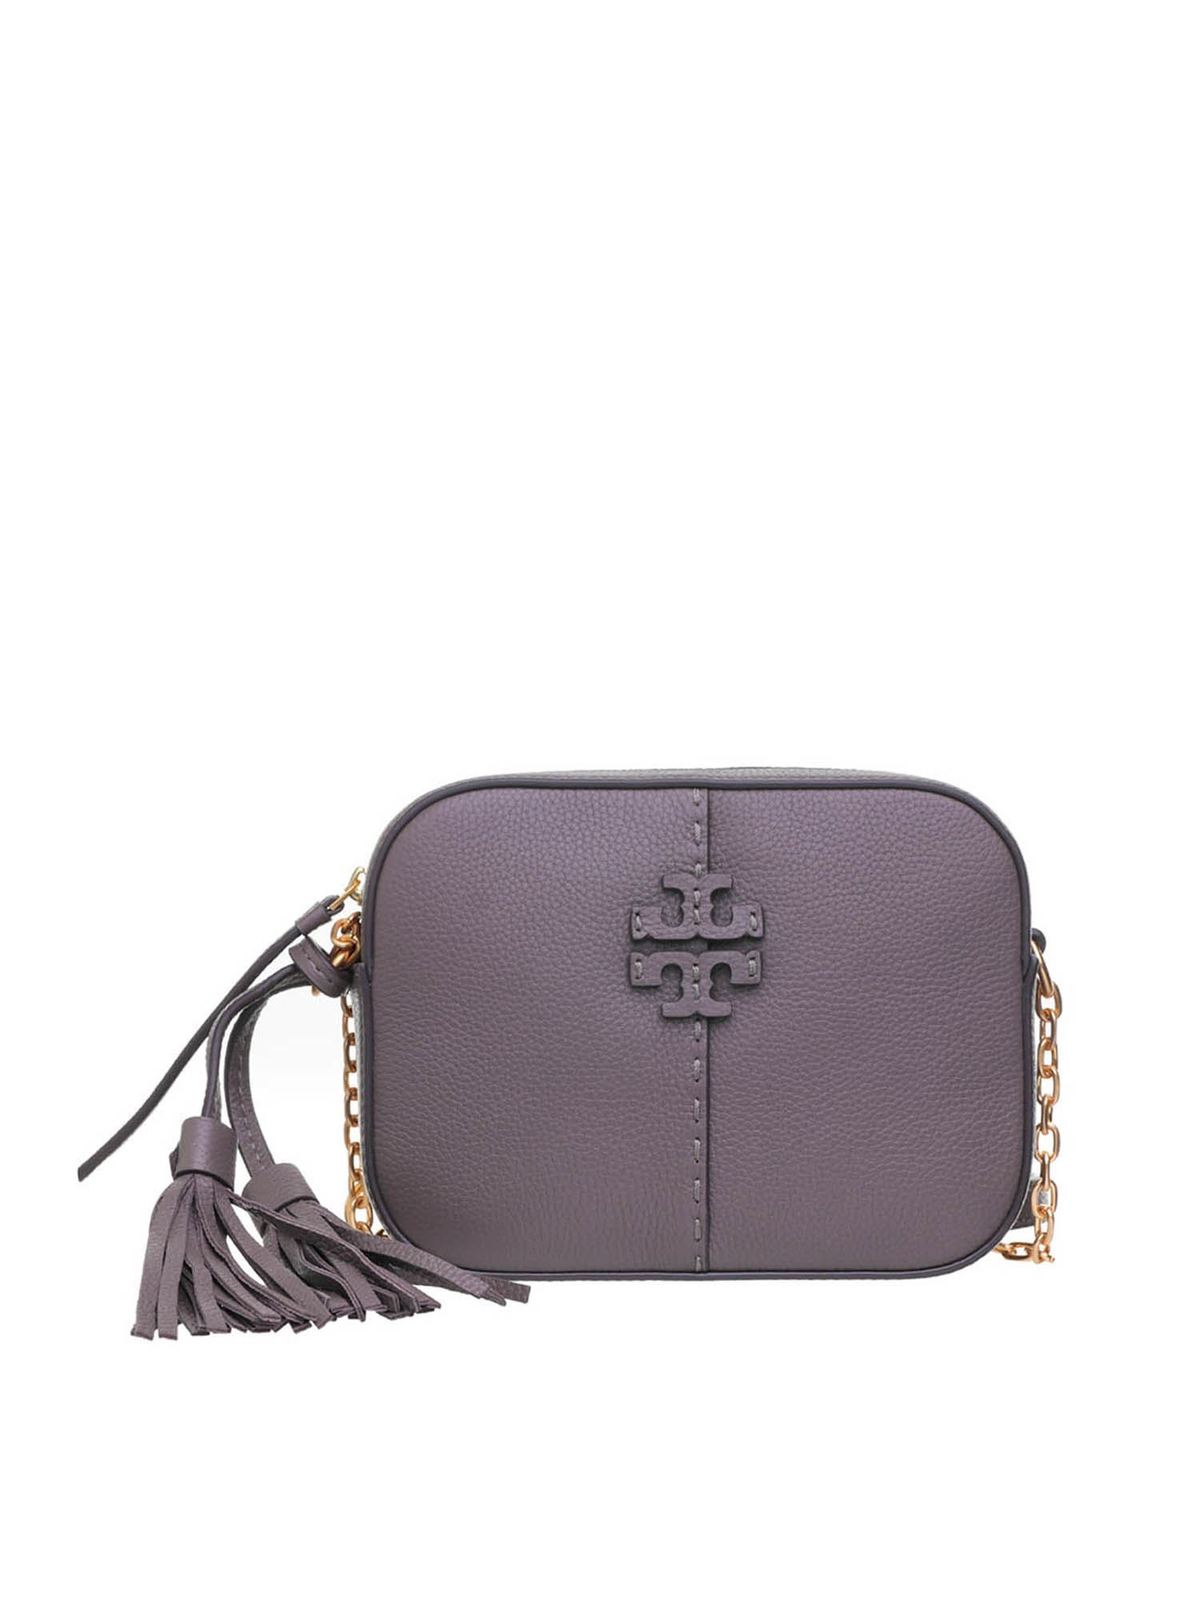 Cross body bags Tory Burch - McGraw camera bag in Silver Maple color ...